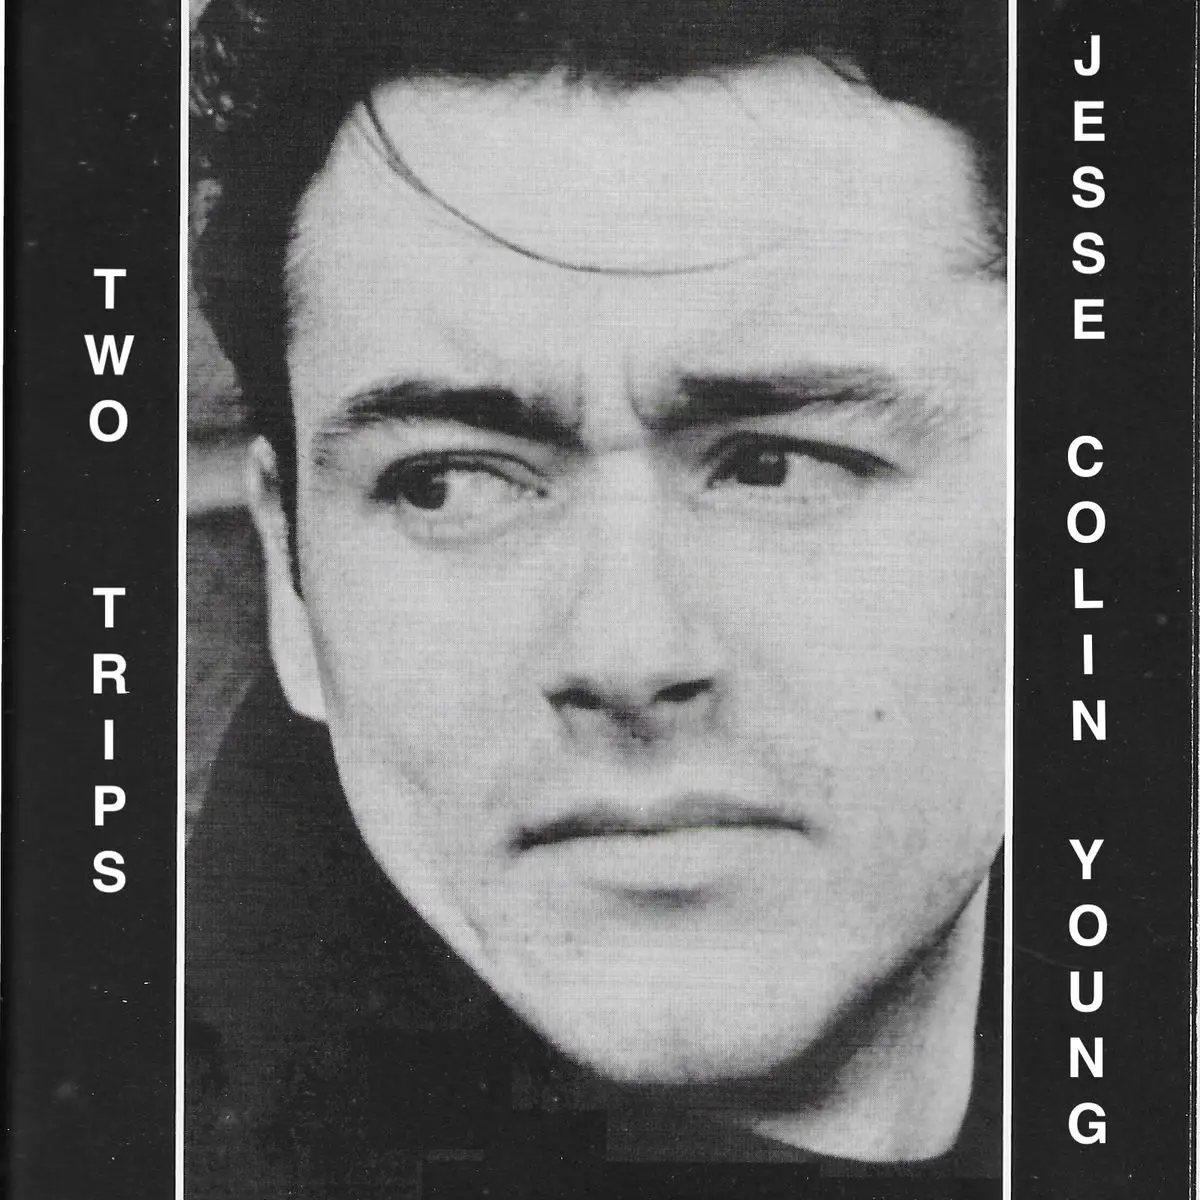 jesse colin young two trips